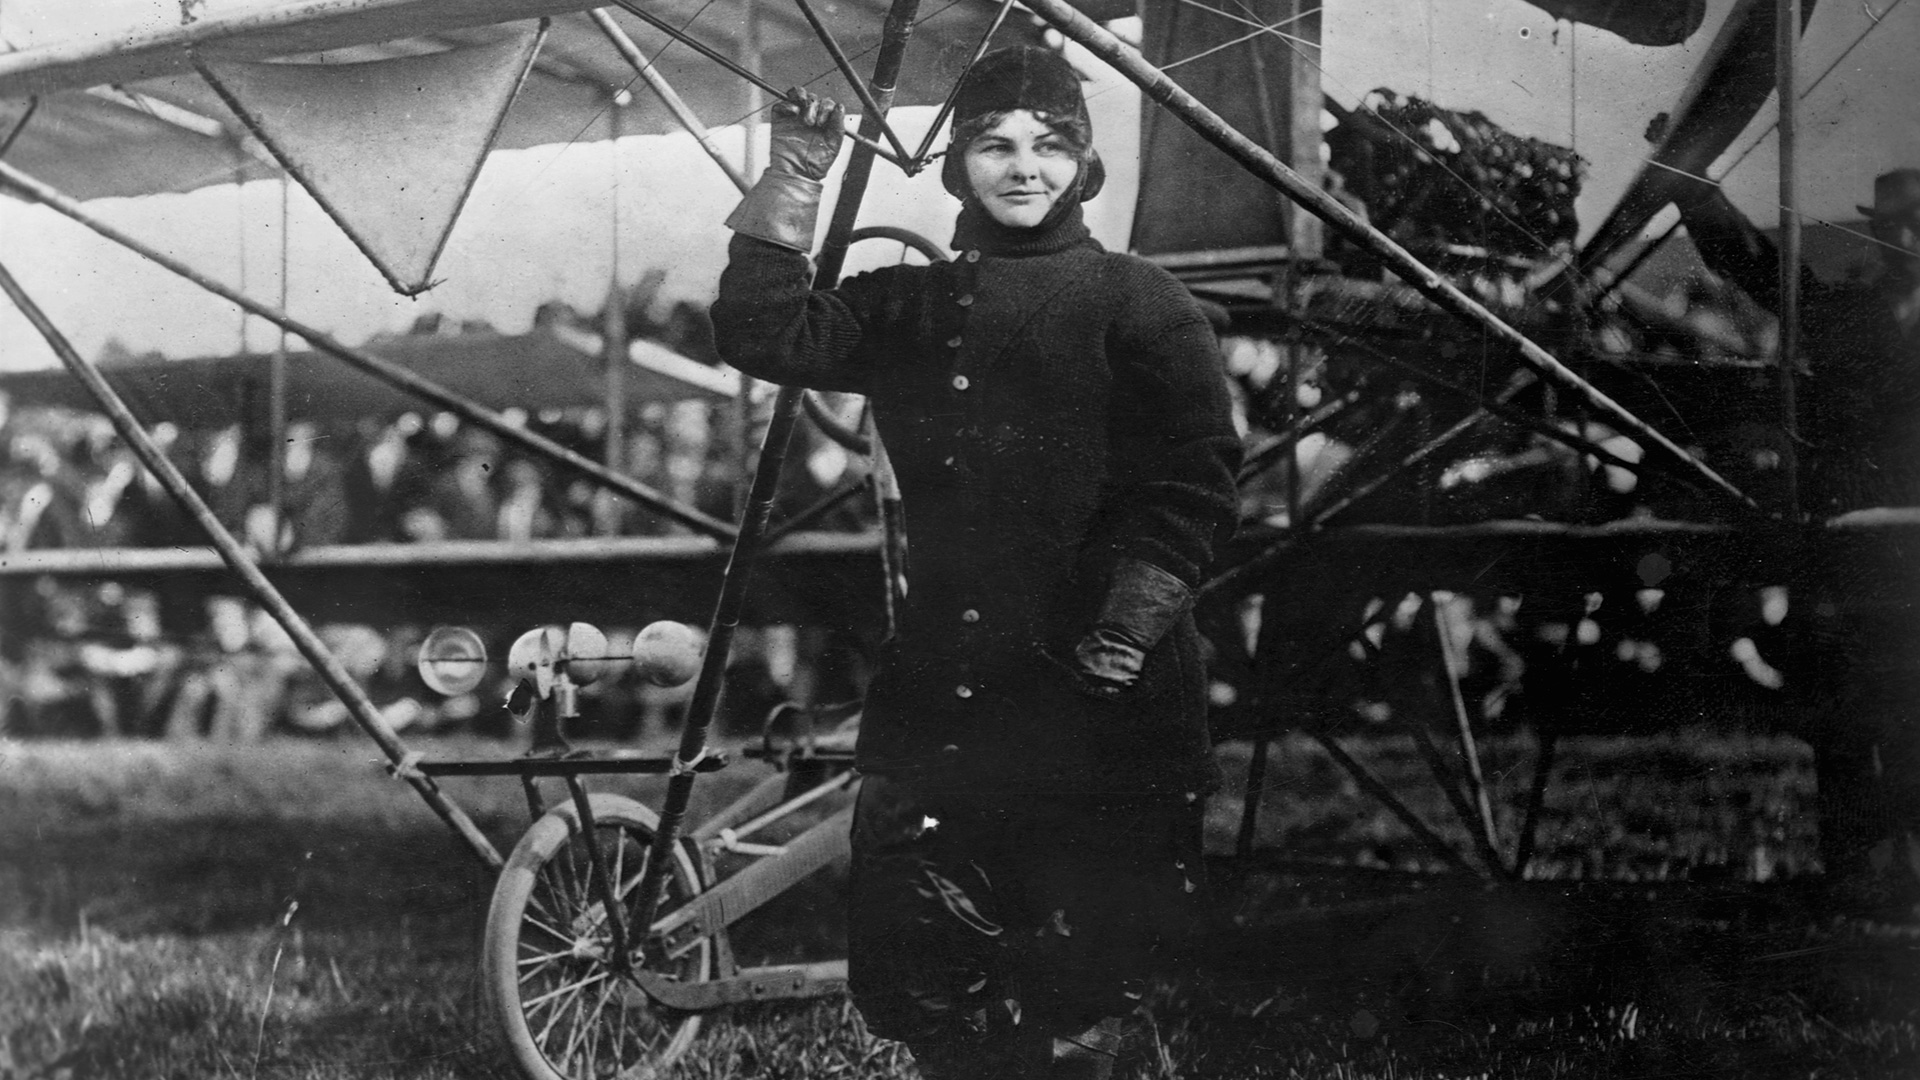 October 23, 1910: Blanche Stuart Scott Became the First American Woman Pilot to Take Flight